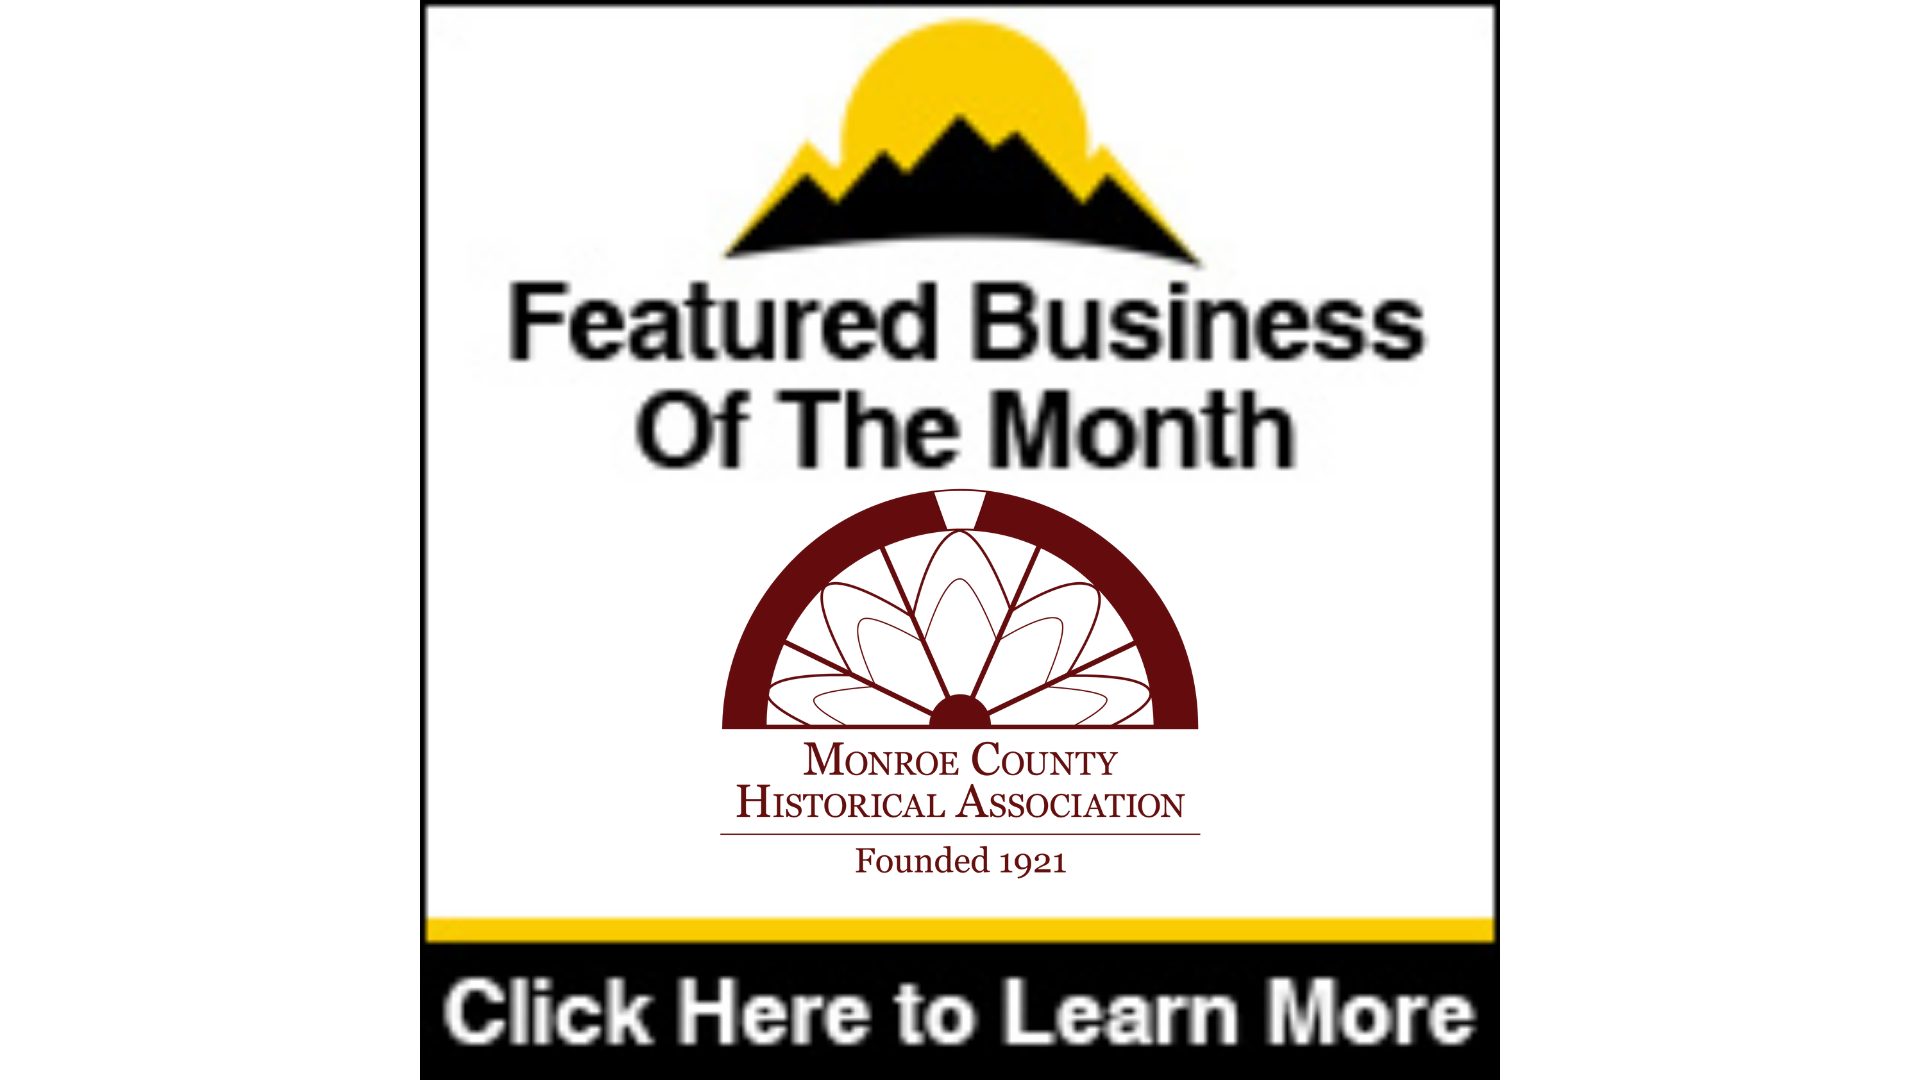 Pocono Featured Business of the Month